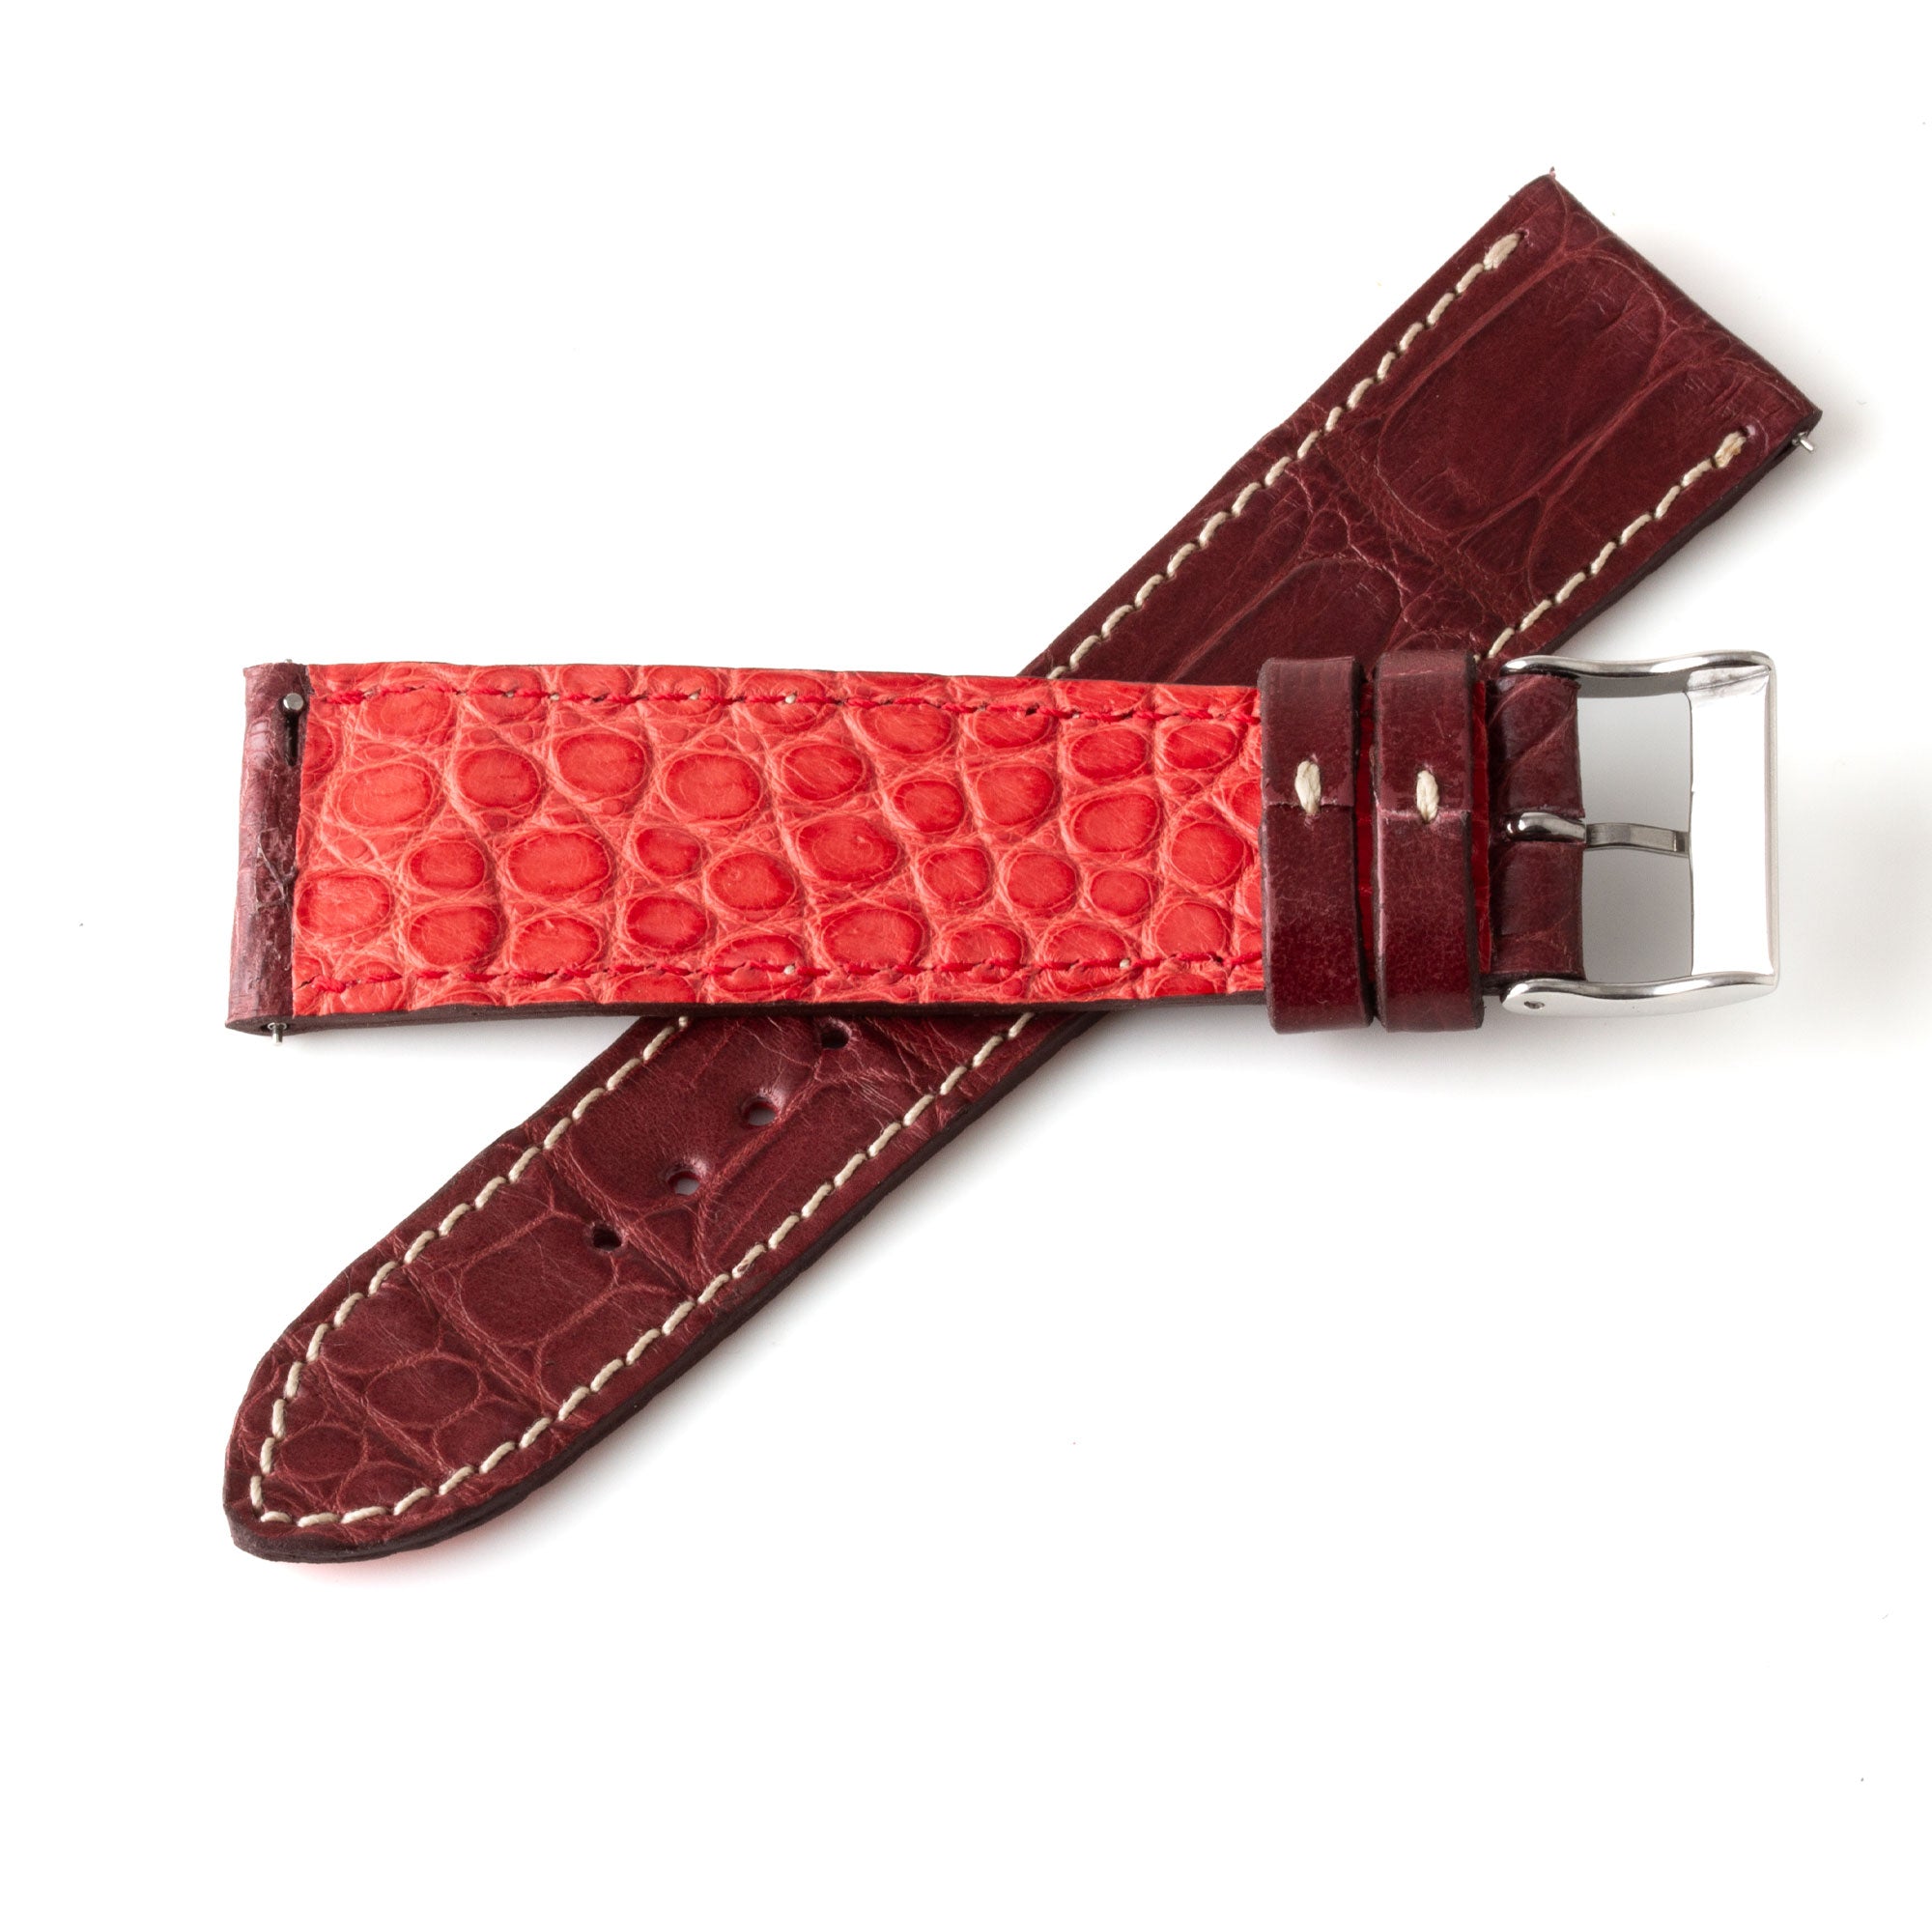 Alligator "Solo" leather watch band - 22mm width (0.87 inches) / Size M (n° 6)